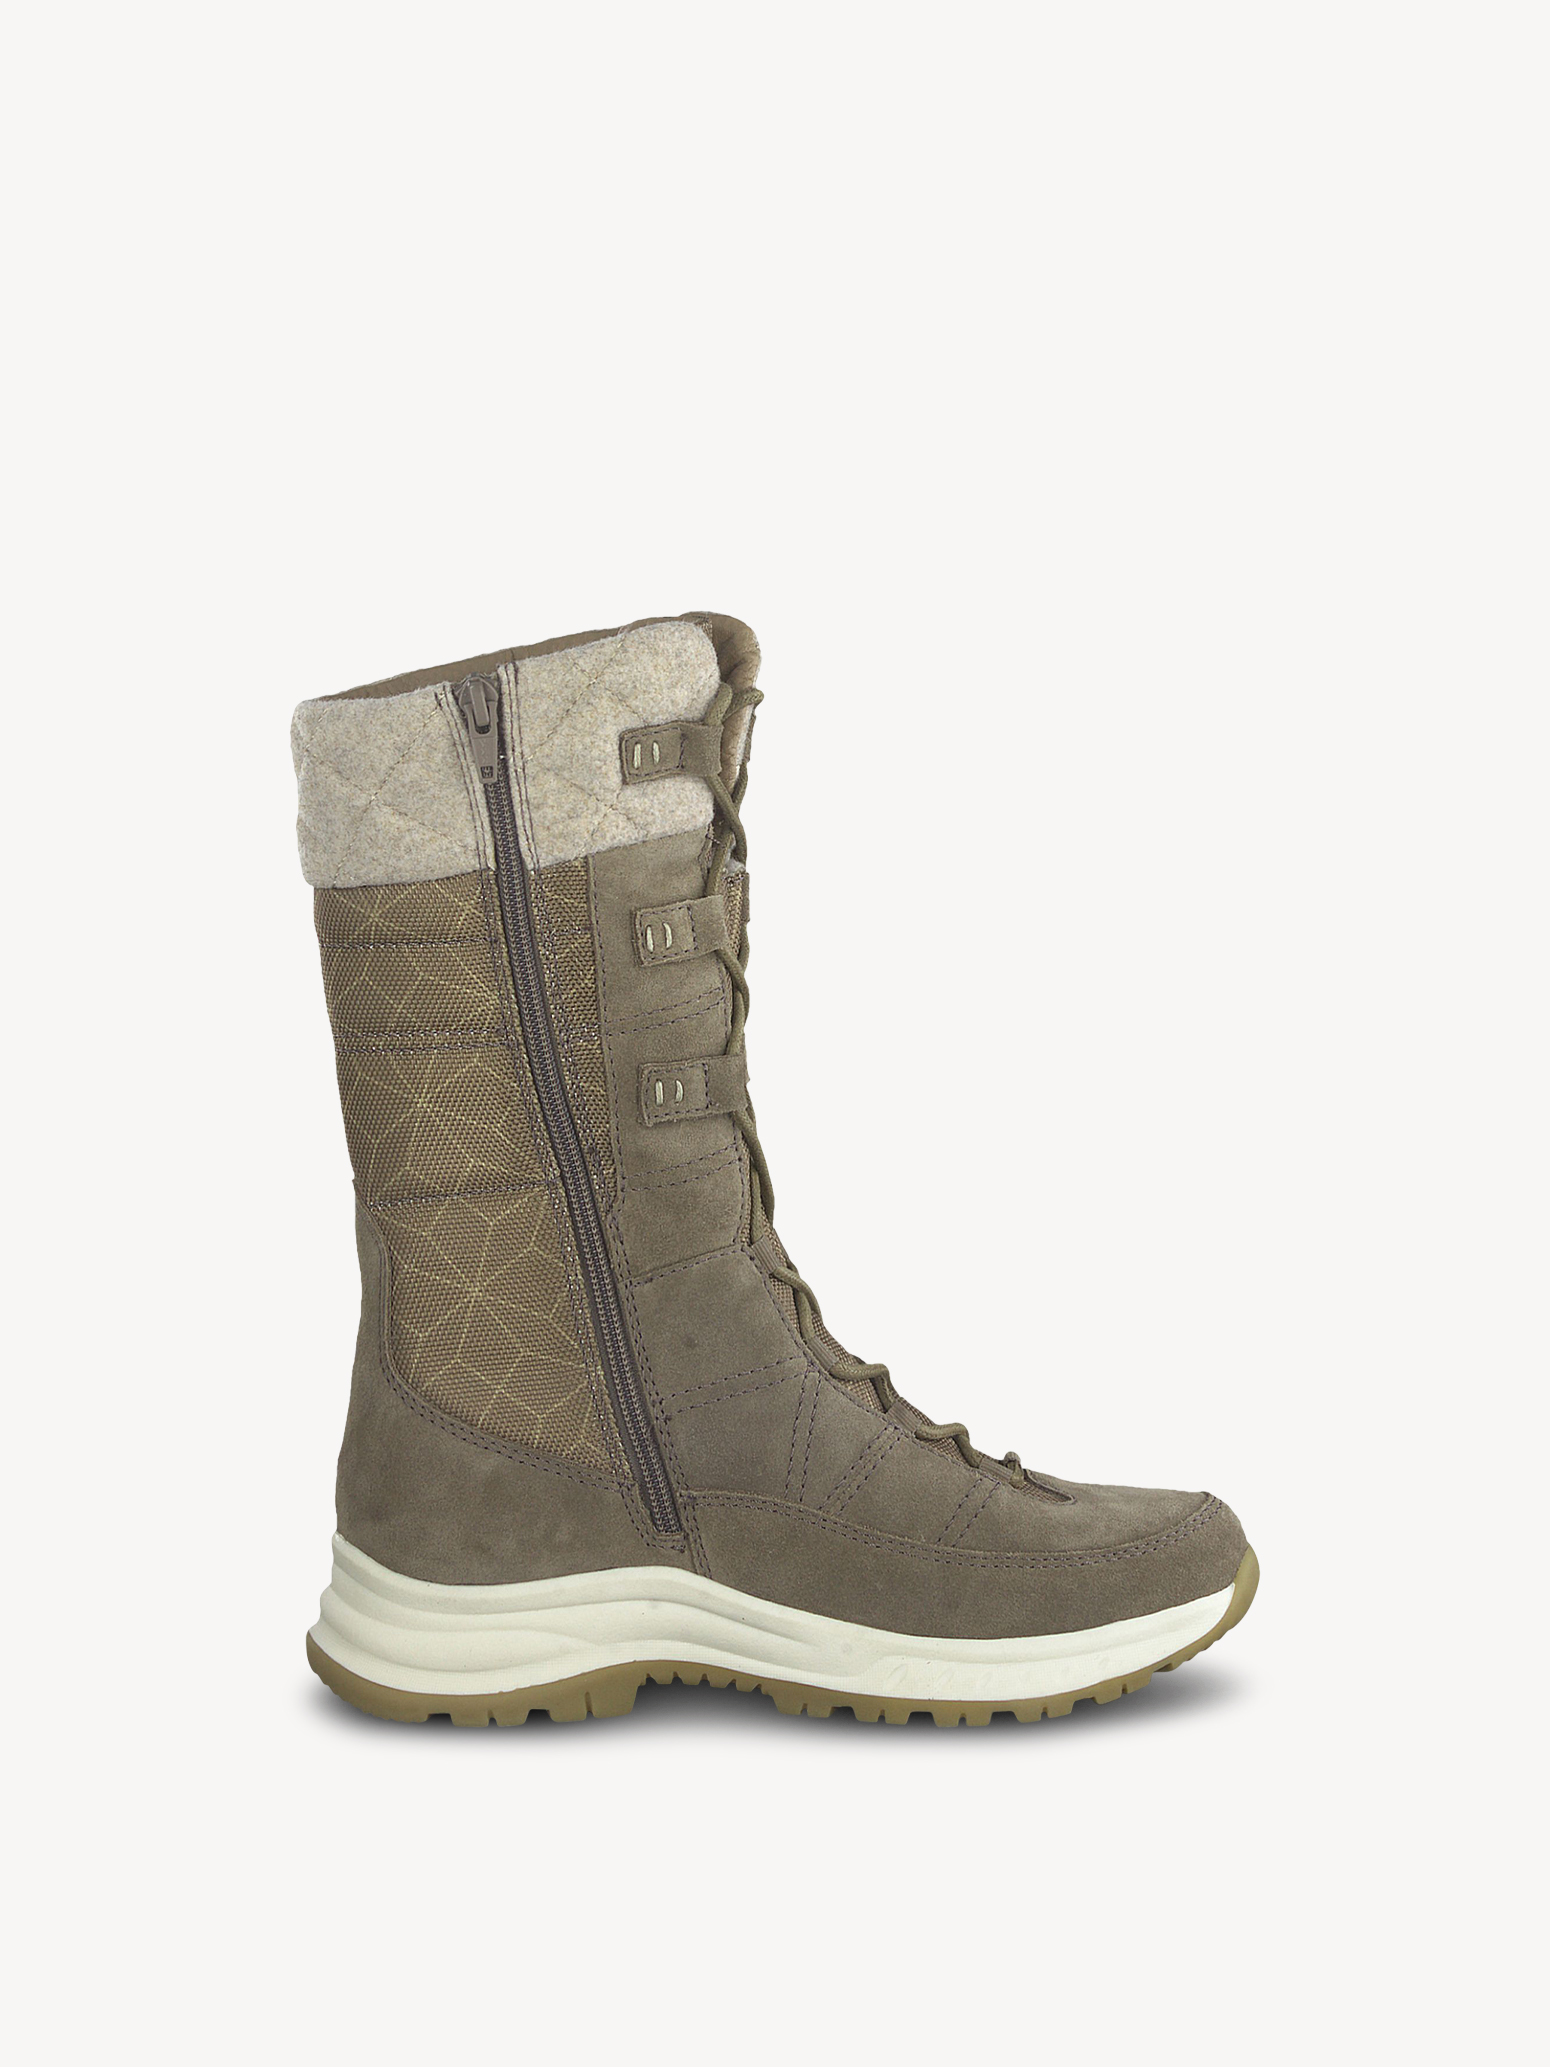 Boots - brown, TAUPE, hi-res